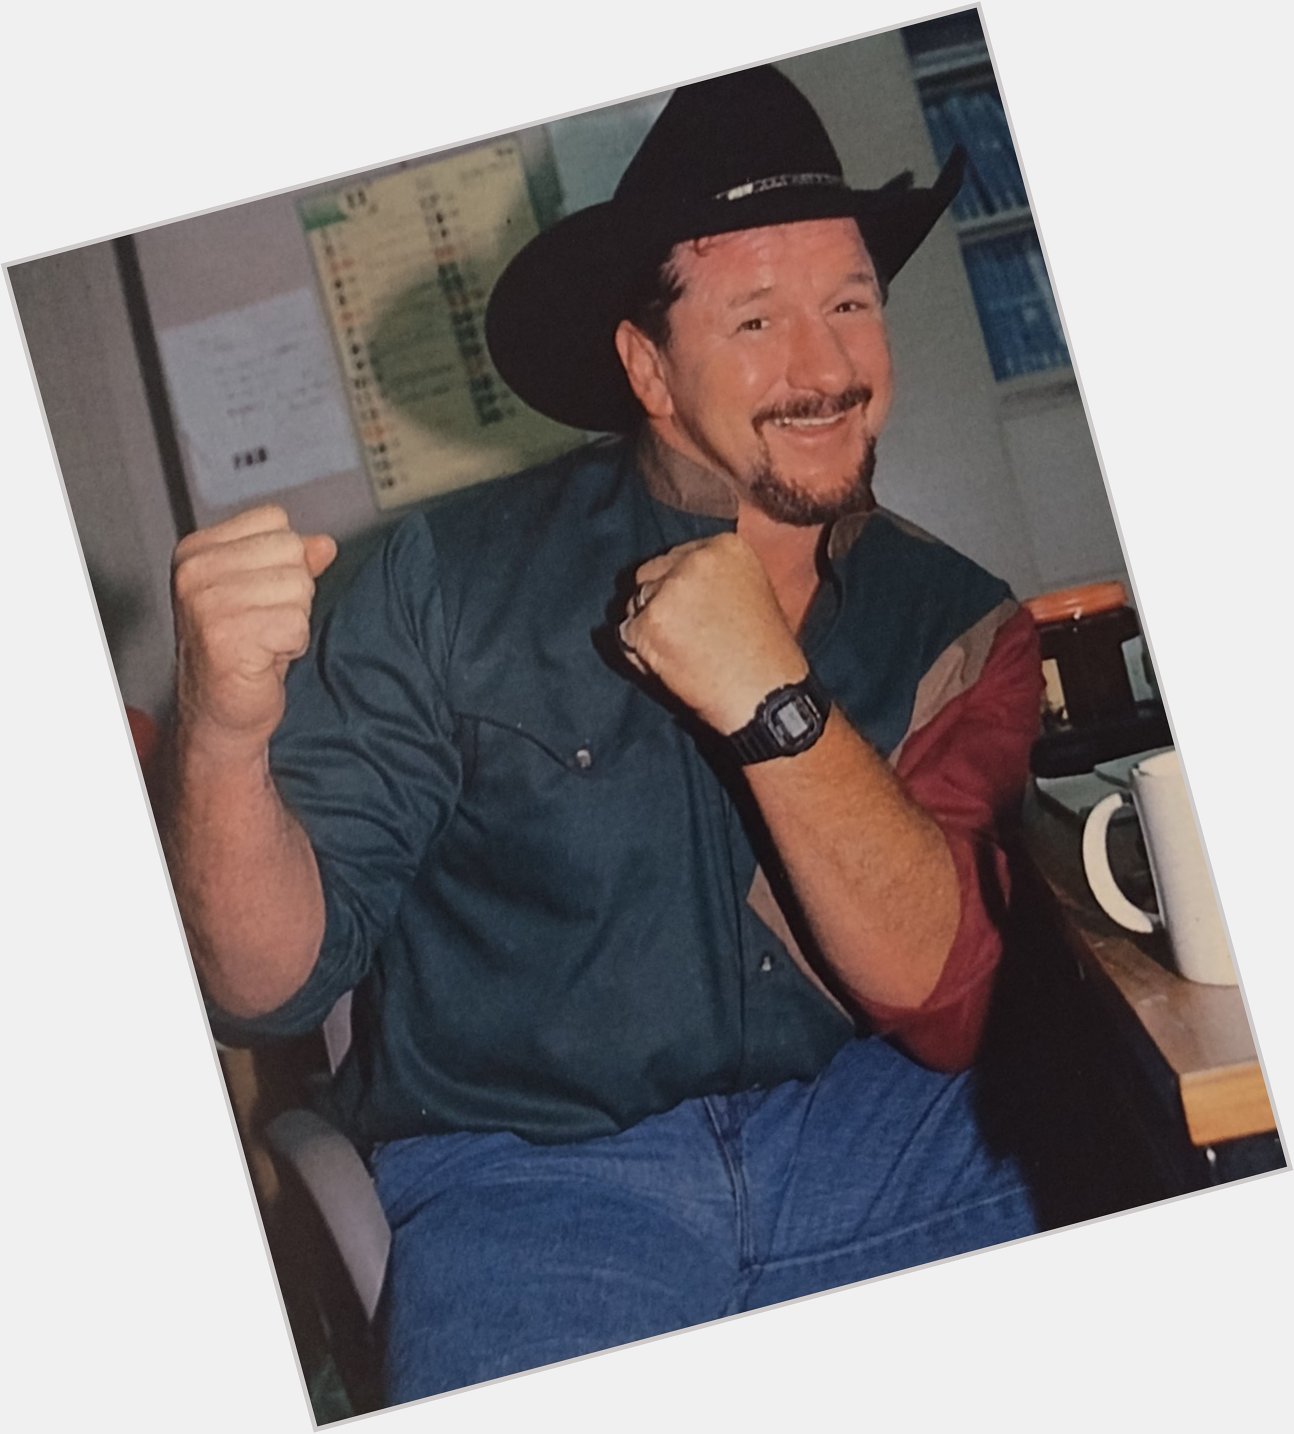 Happy birthday to Terry Funk, the greatest! 